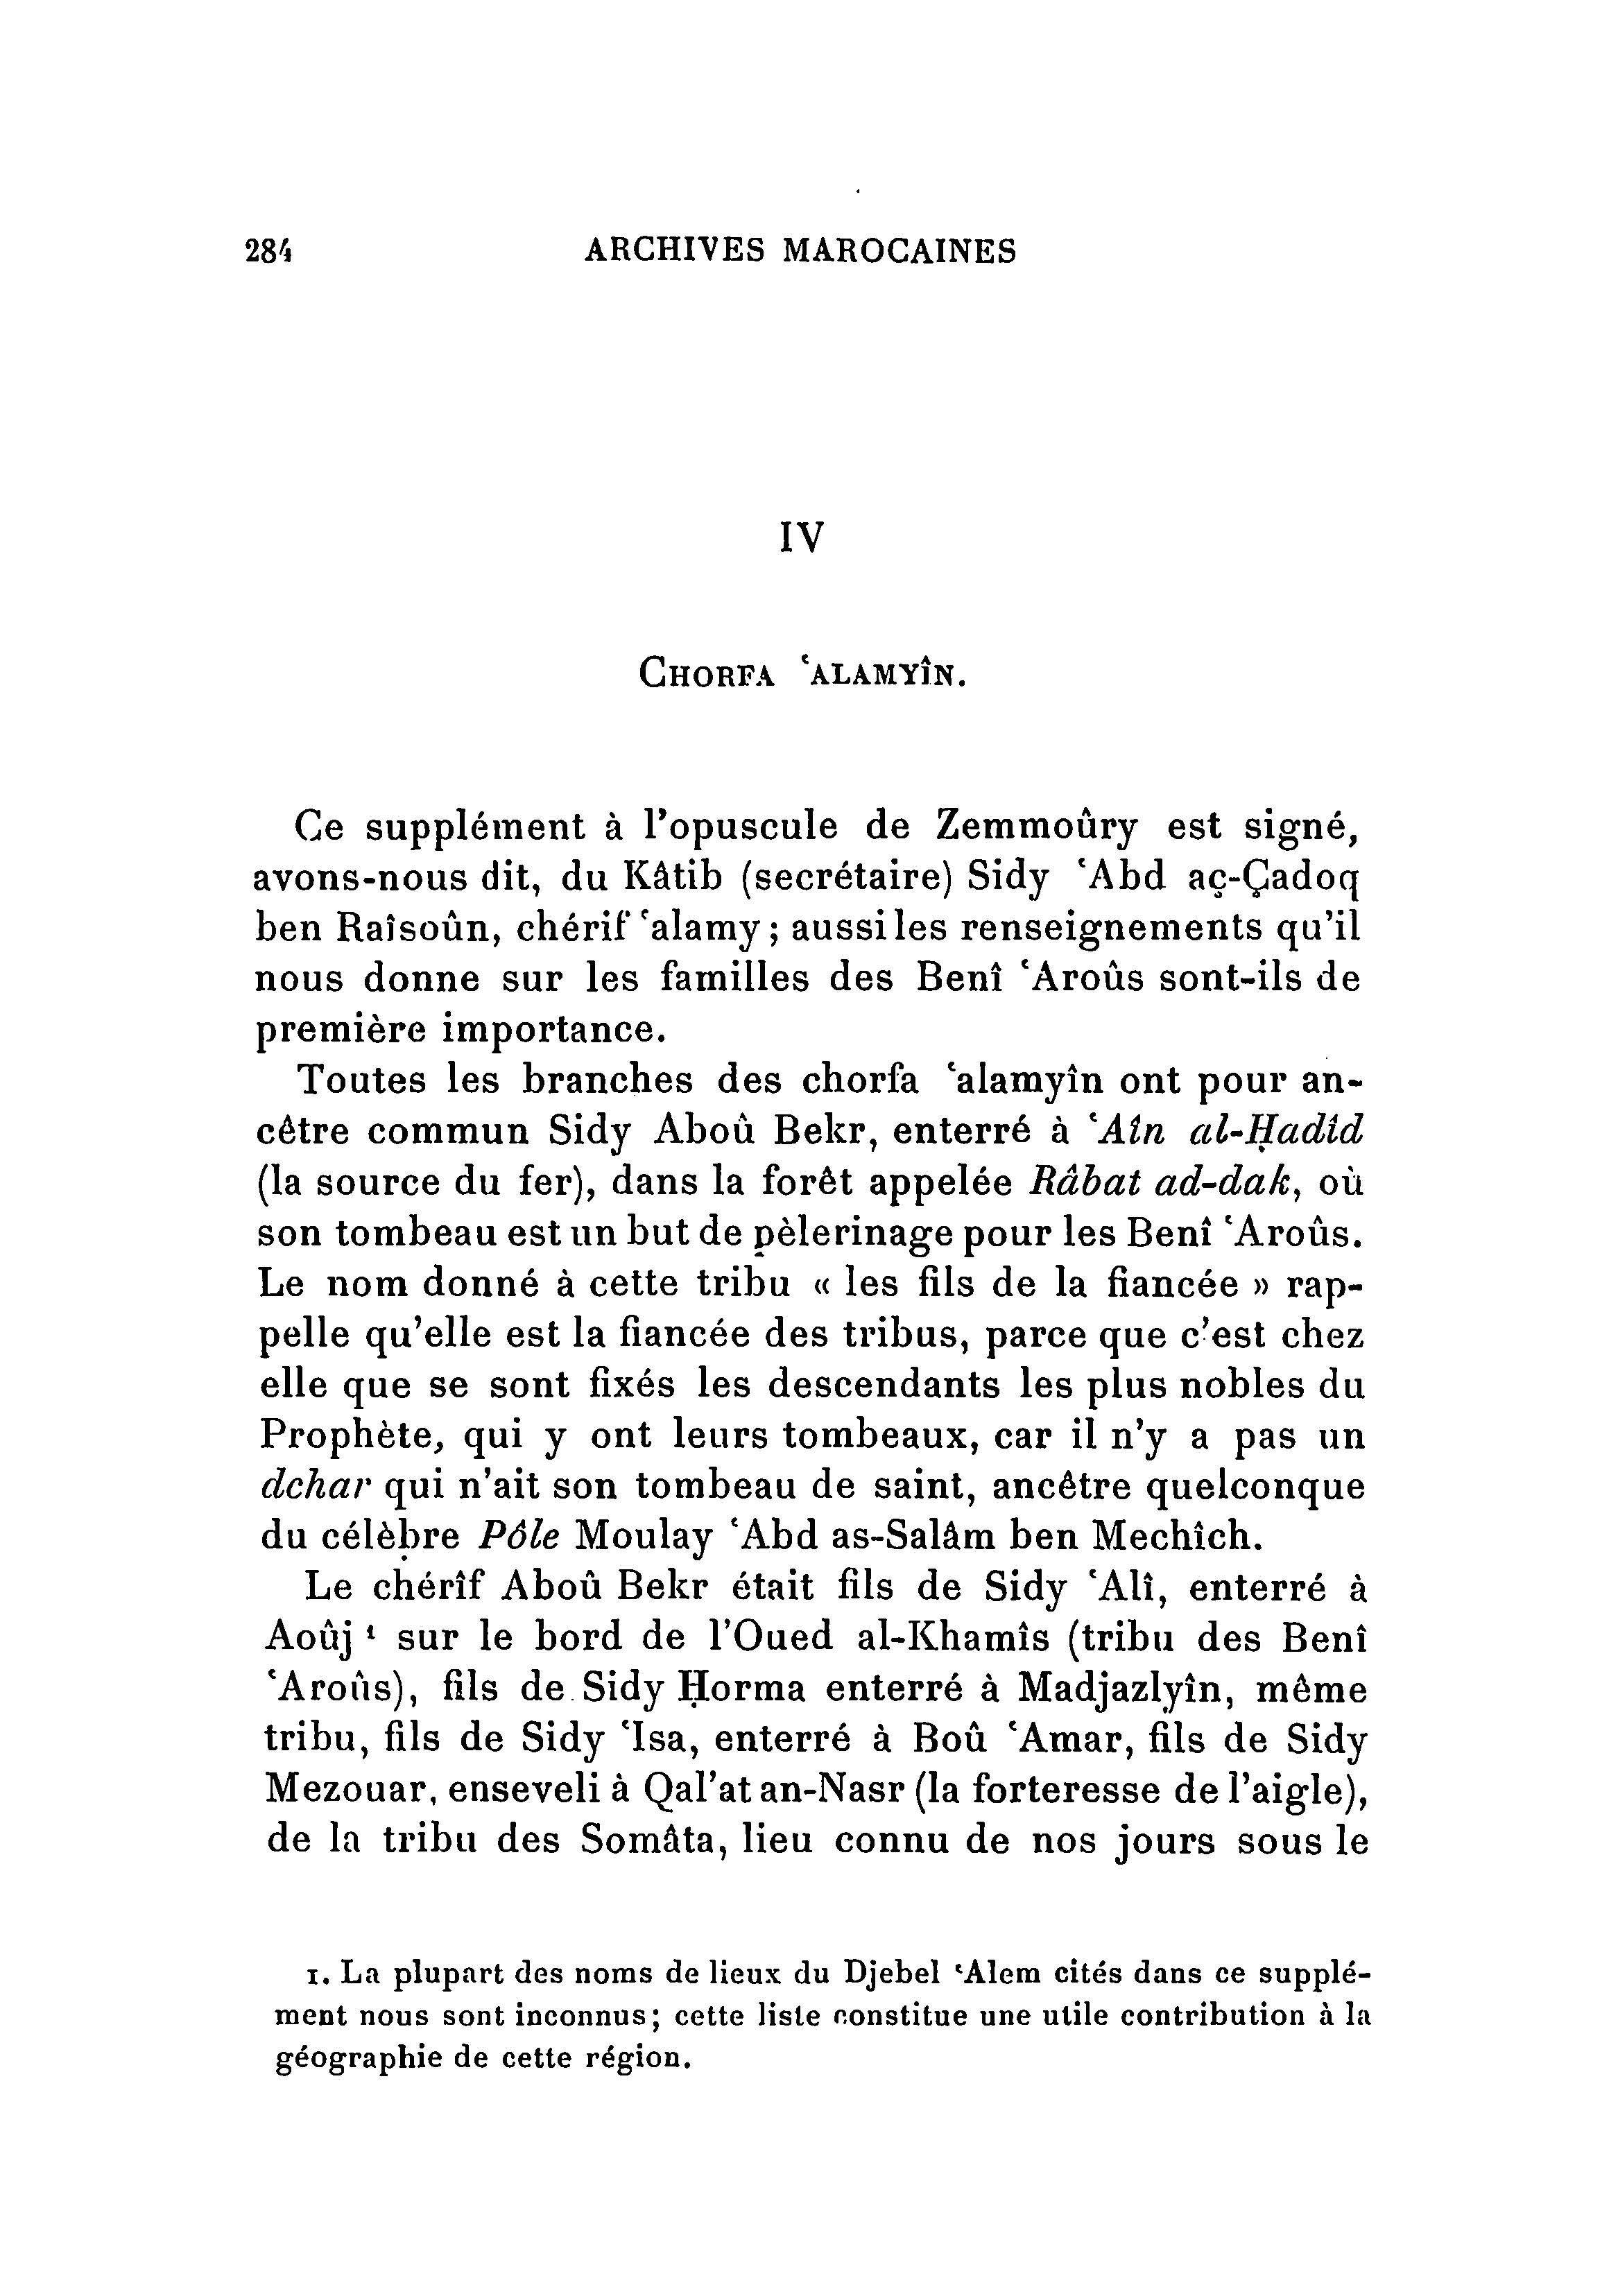 archives_marocaines-vol-2_1_page_459